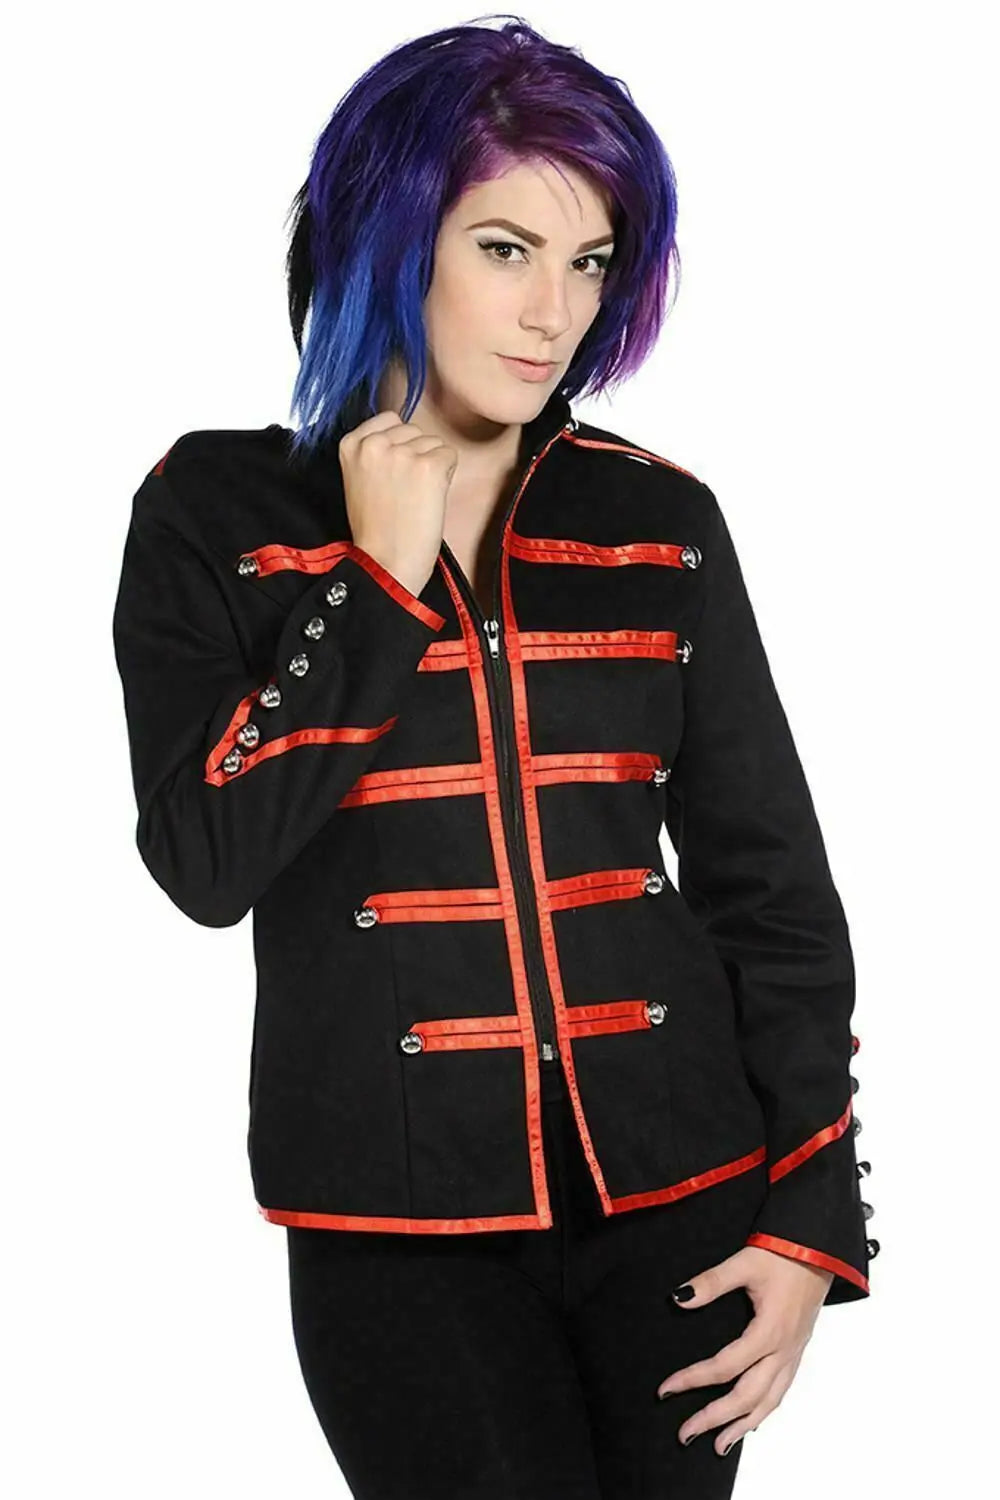 PUNK/STAGEWEAR Banned Military Drummer Red Jacket XS UK 8 Banned